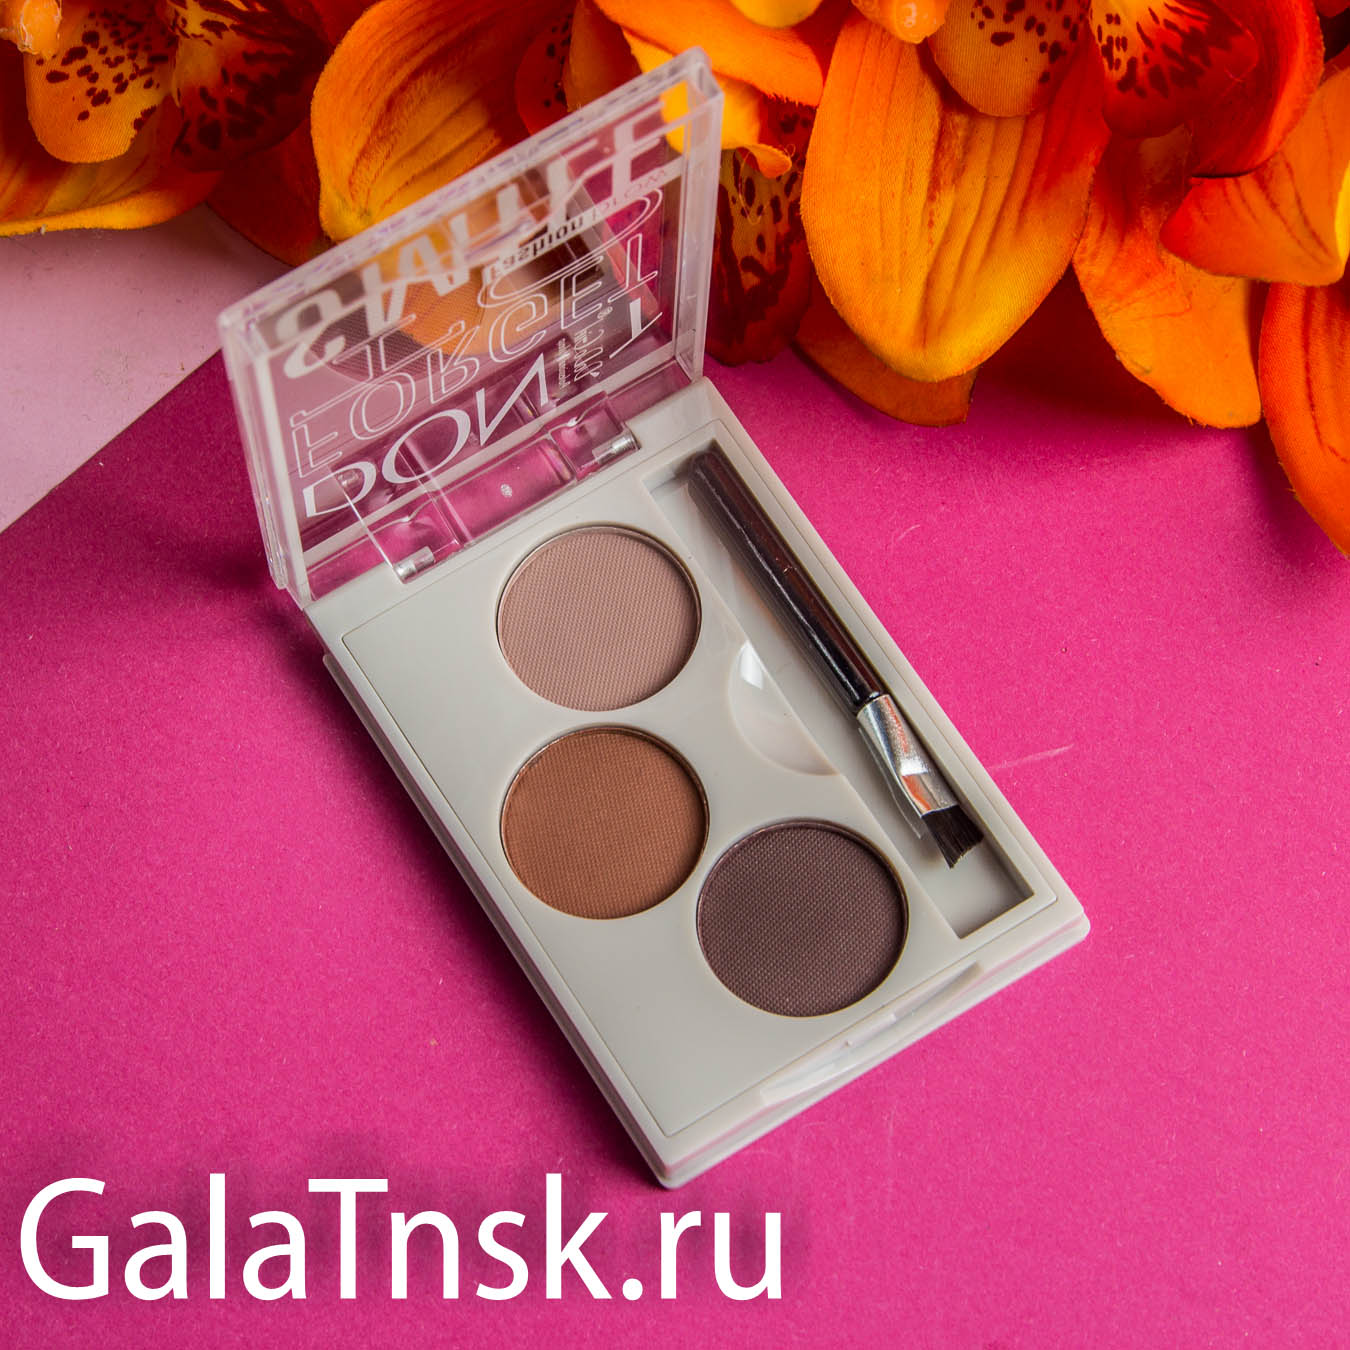 DO DO GIPL Тени для бровей 3colors DON`T FORGET TO SMILE BP022 02